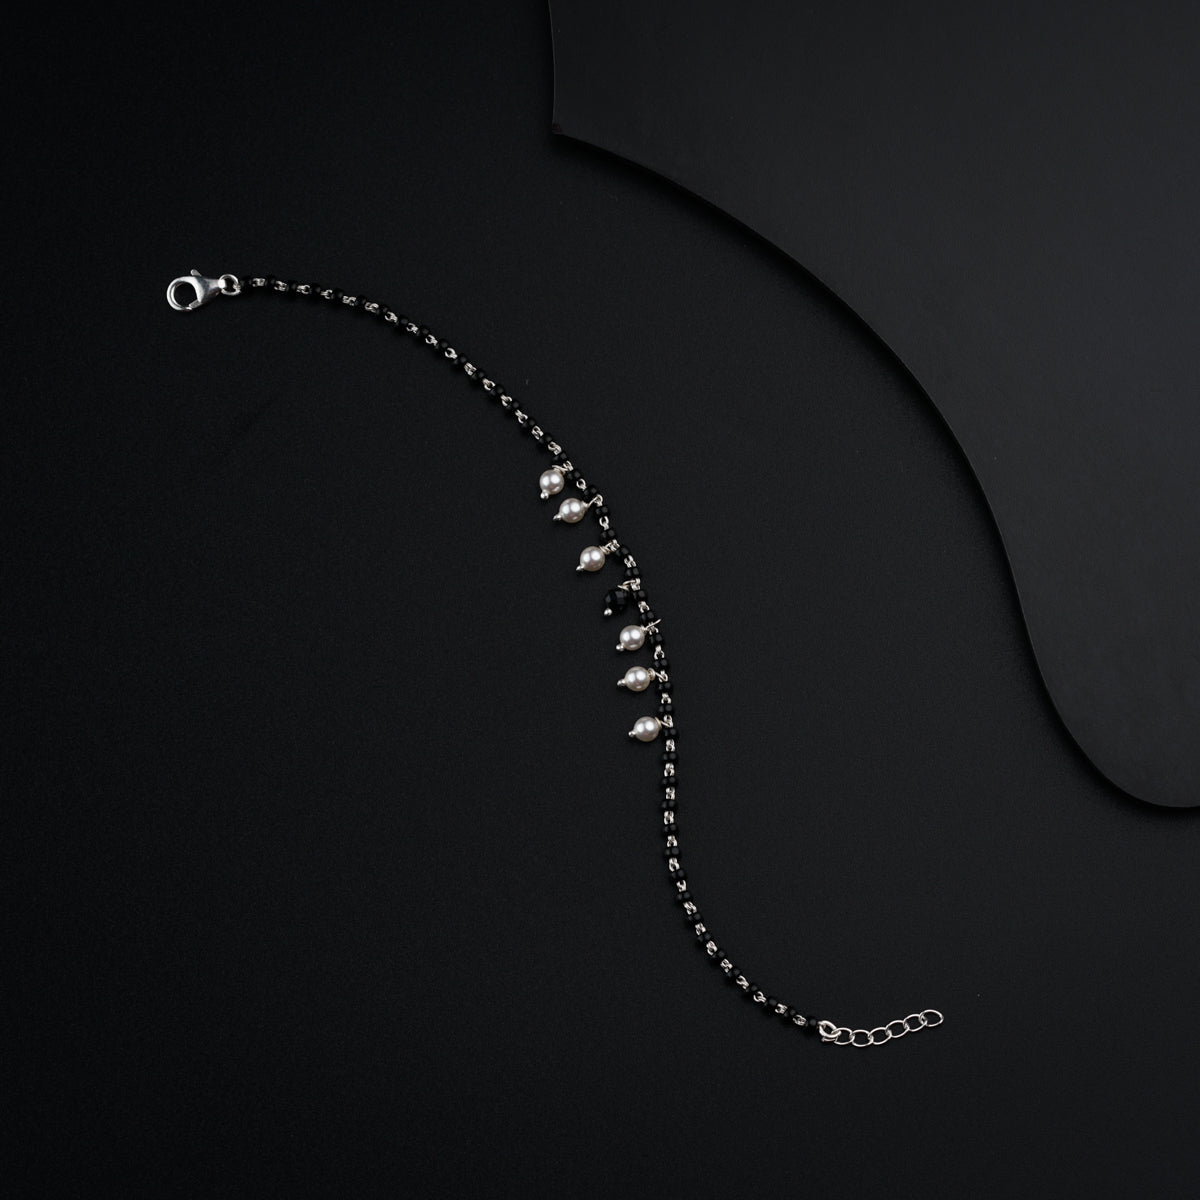 a black background with a silver chain and a black background